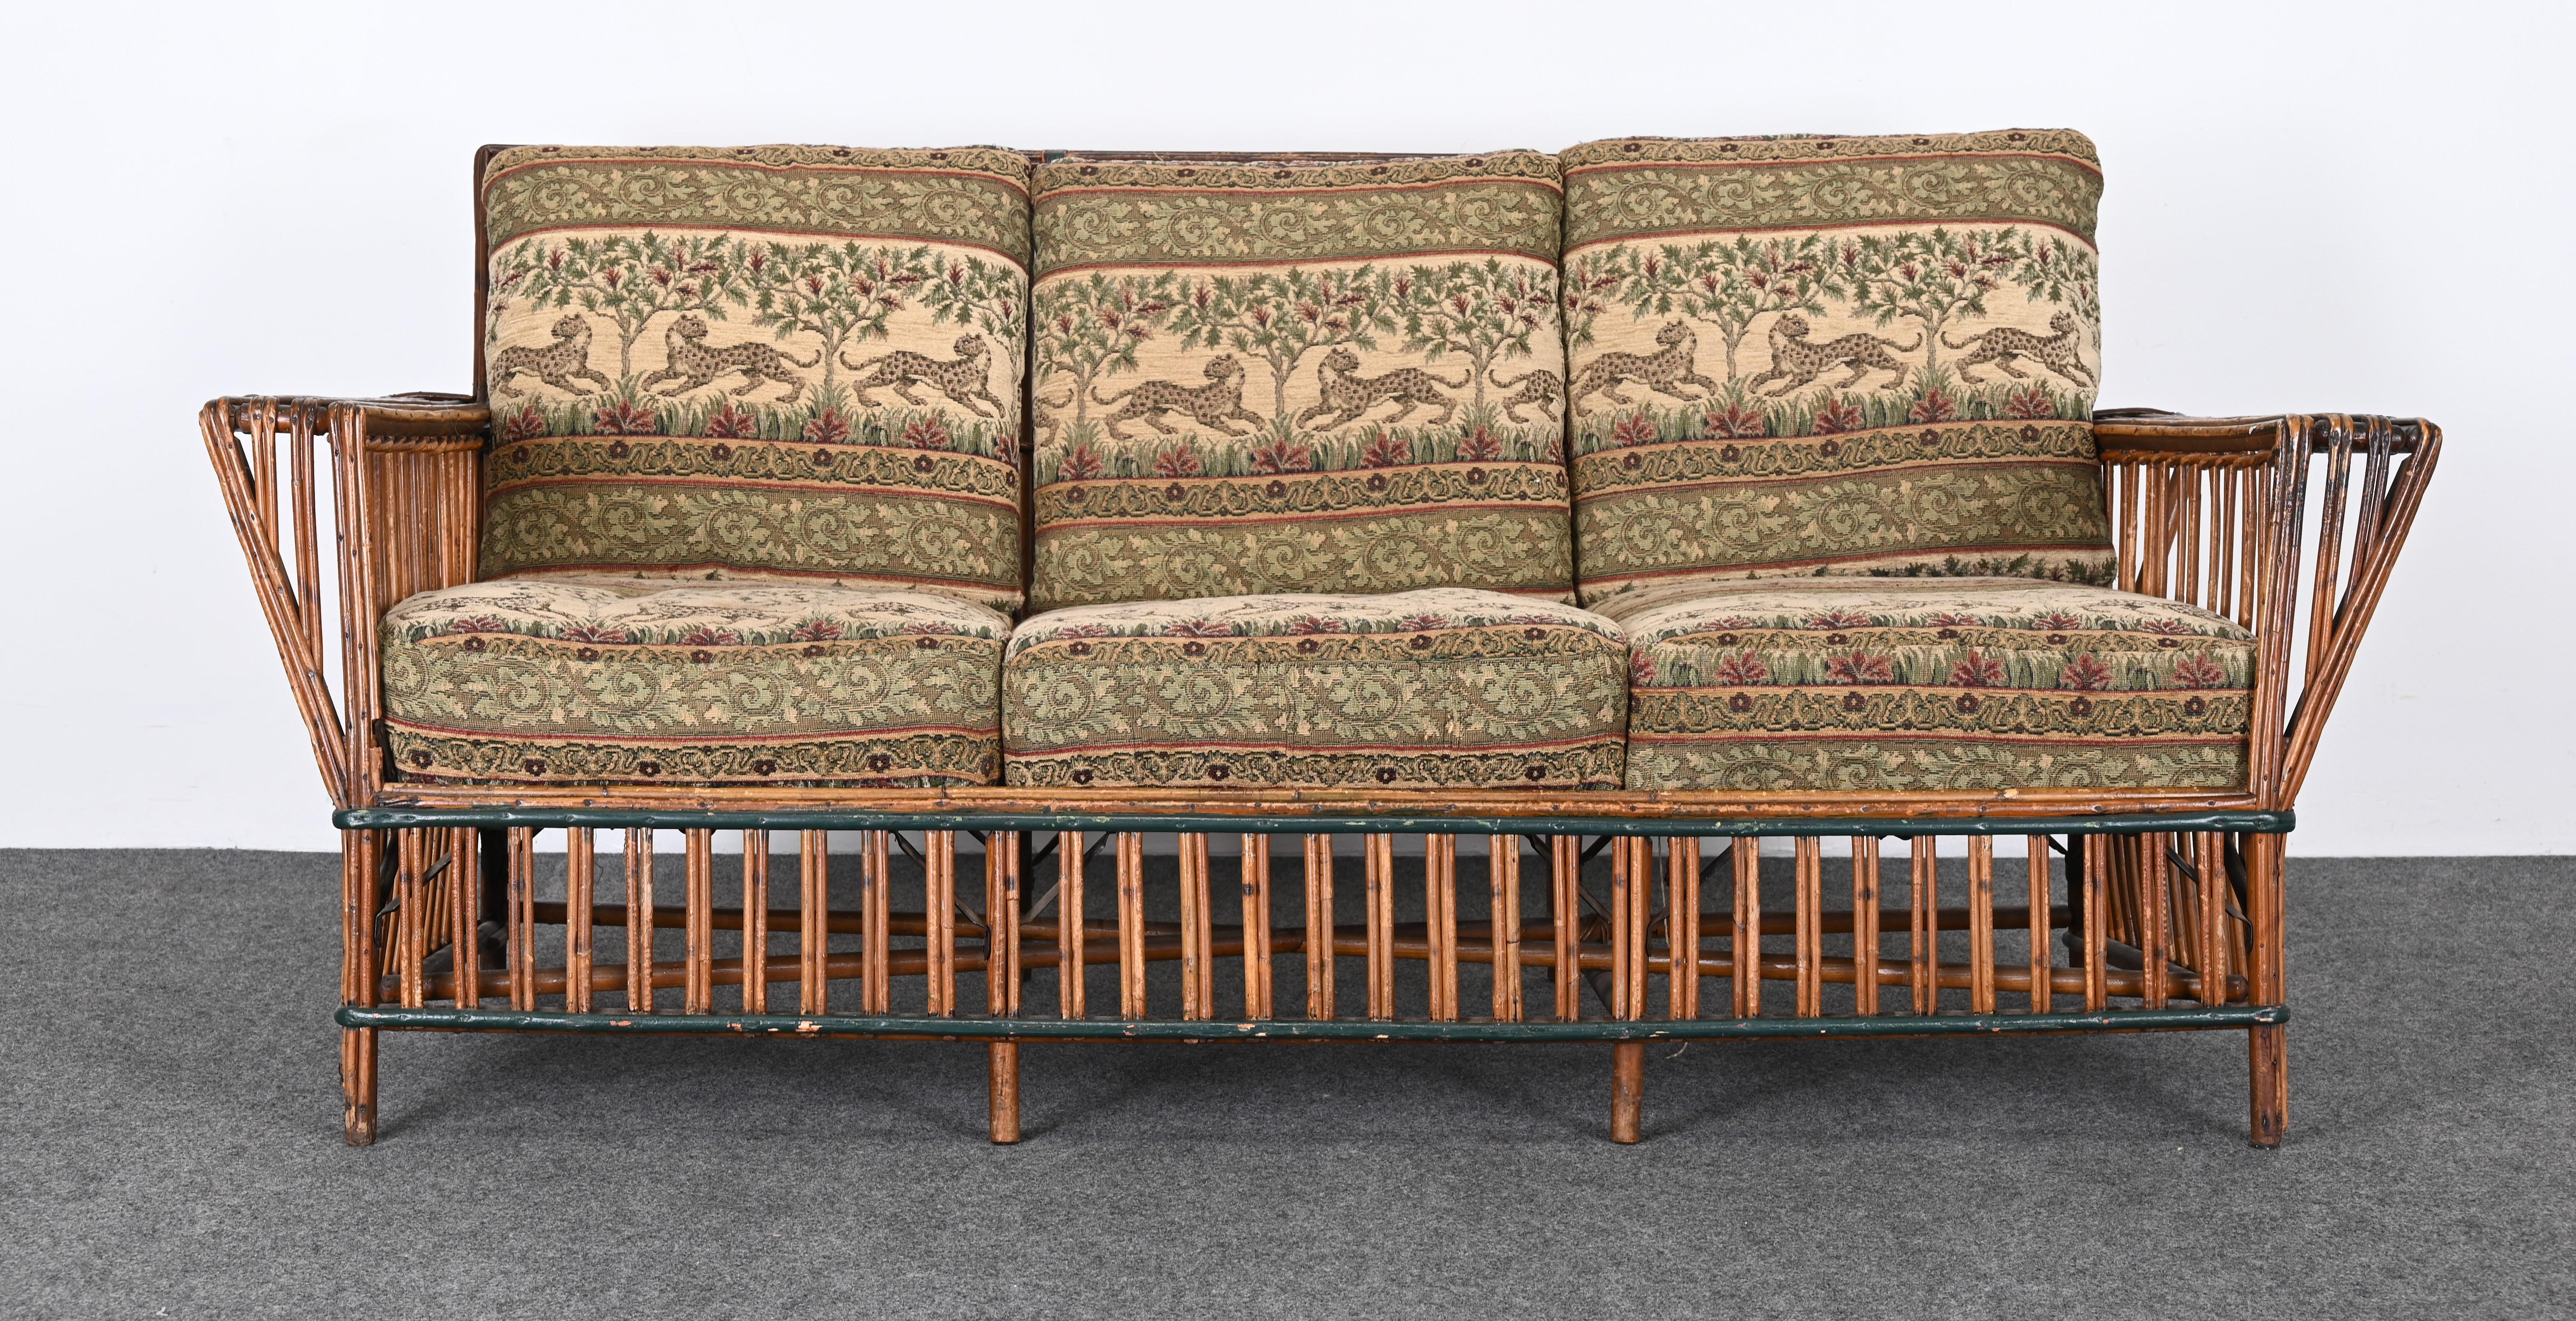 Art Deco Split Ypsilanti Stick Reed Wicker or Sofa with Pair Arm Chairs c. 1930s For Sale 8